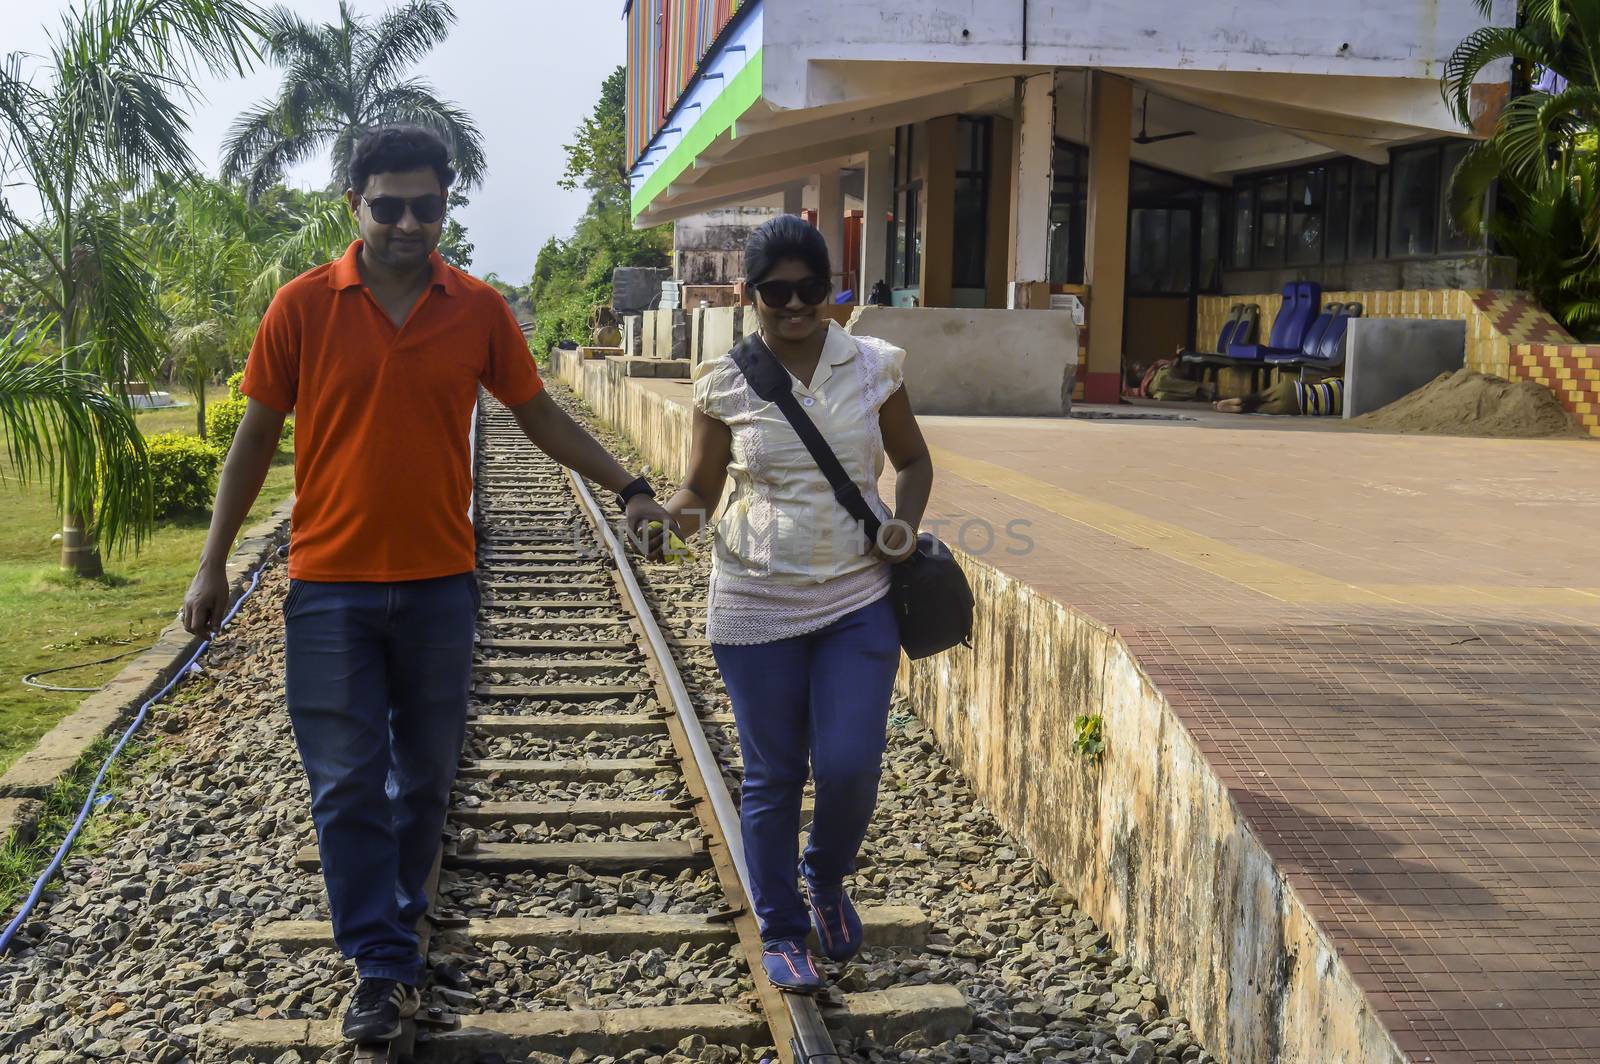 The young couple walking on a railway track. by sudiptabhowmick